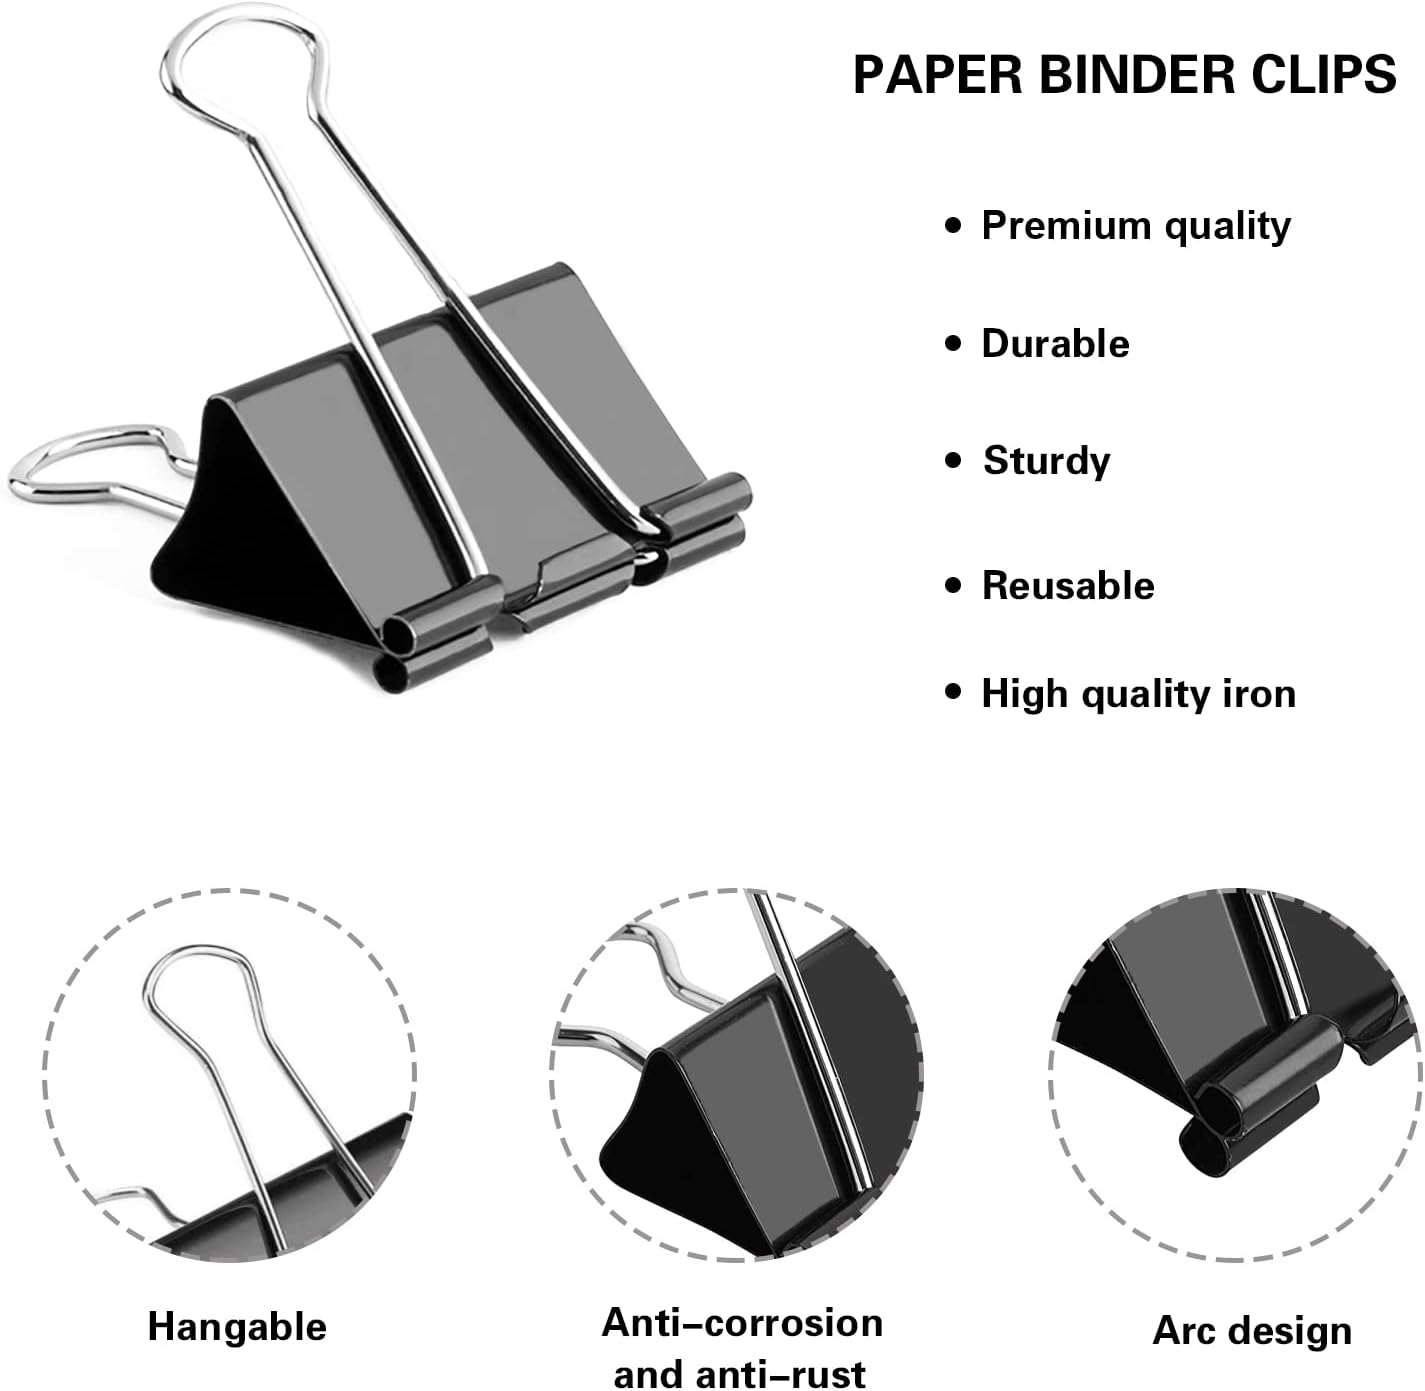 130Pcs Paper Binder Clips Paper Clamps, PIOGHAX 6 Assorted Sizes Metal Binder Clips with Cylinder Plastic Suitable for Organizing Paper for Use in Offices, School Studies, Students and Office Workers